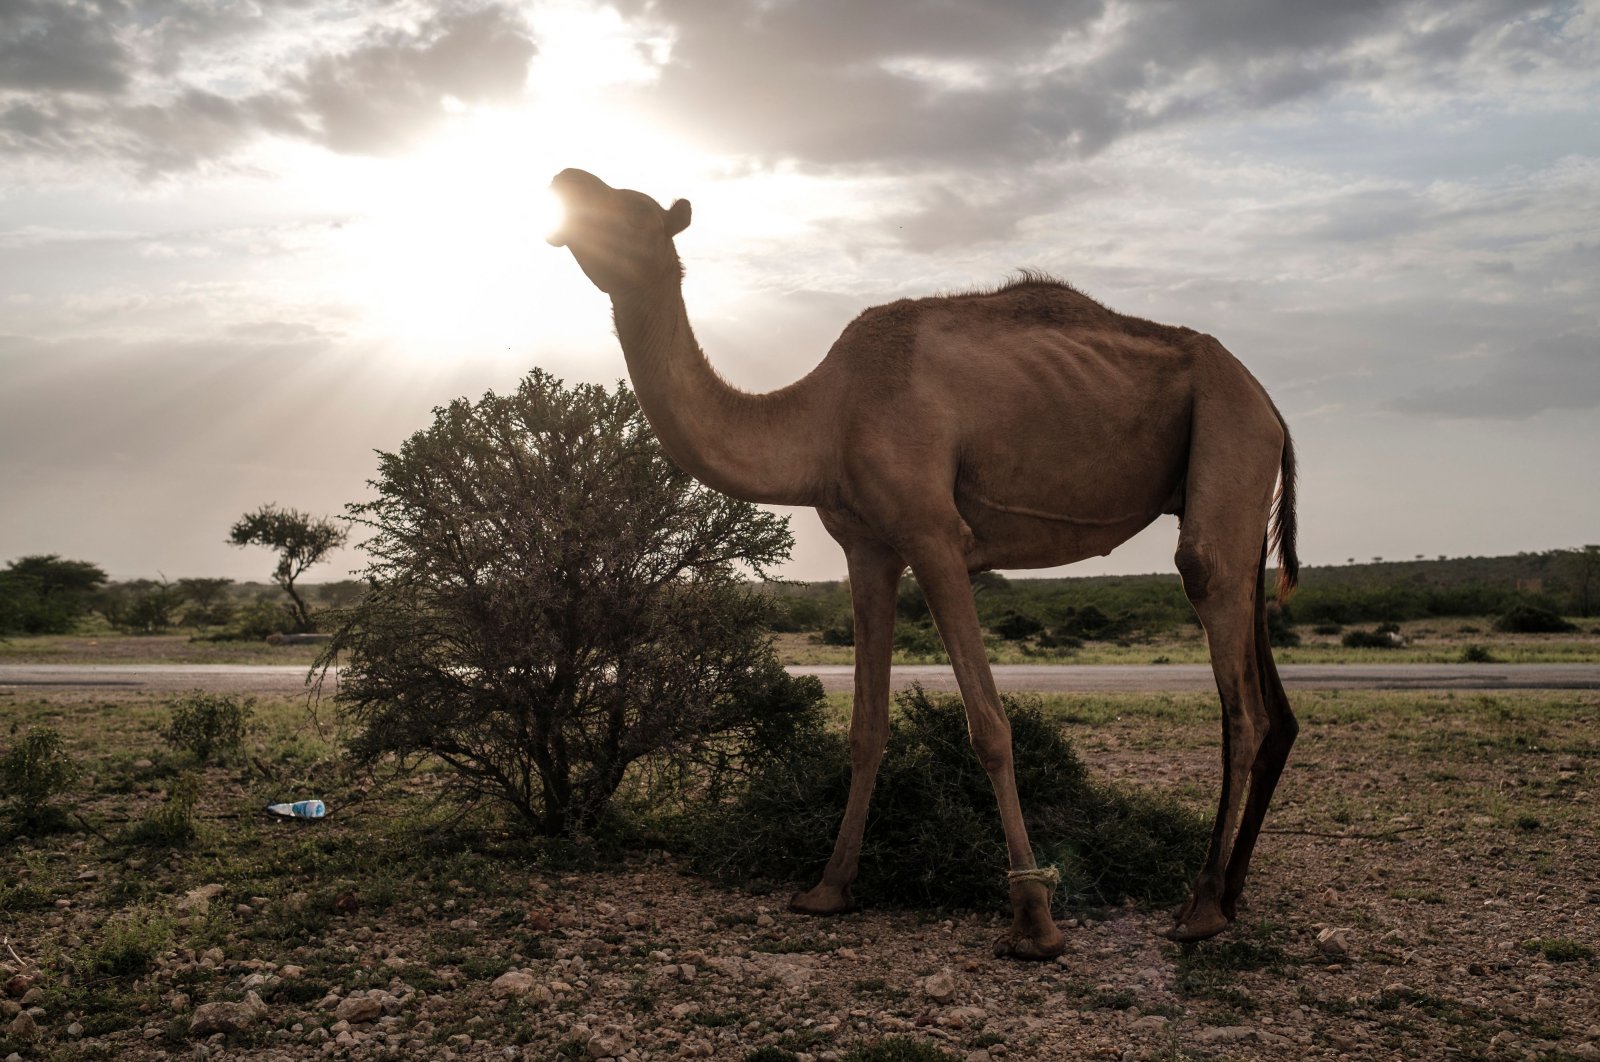 This file photo shows a camel standing in the outskirts of the city of Hargeisa, Somaliland, on Sept. 18, 2021. (AFP Photo)